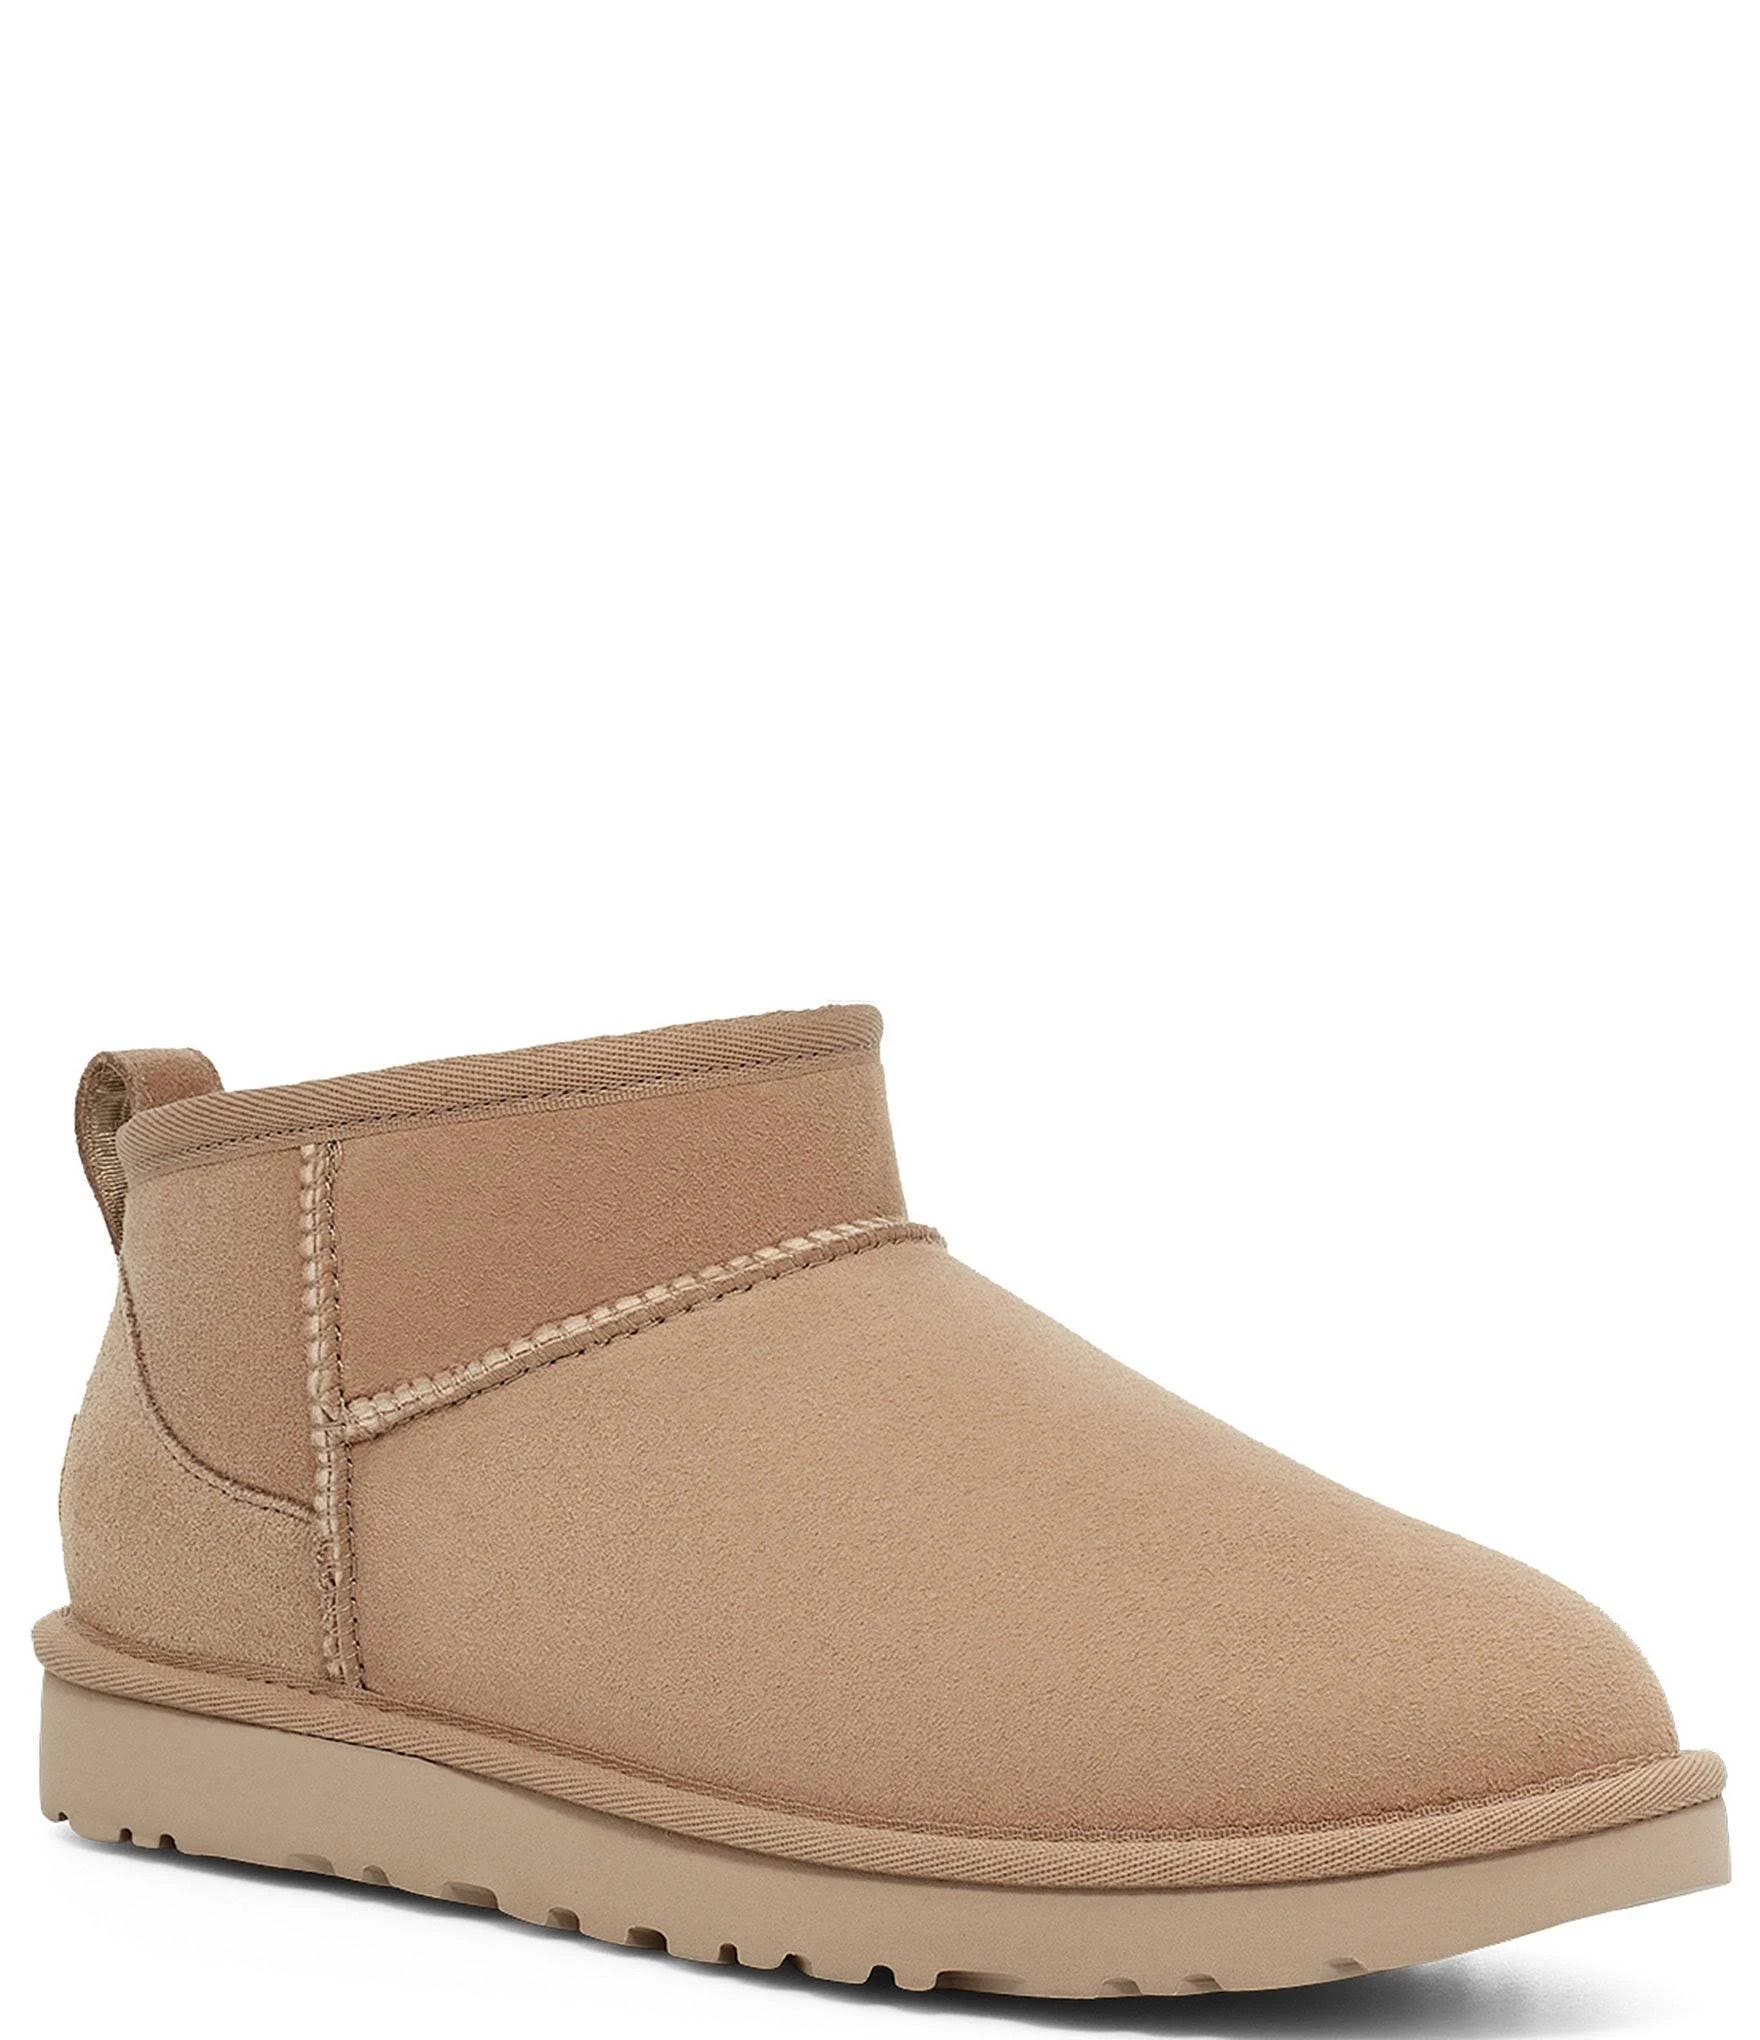 Ugg Tan Booties with Suede Upper and Wool Lining | Image